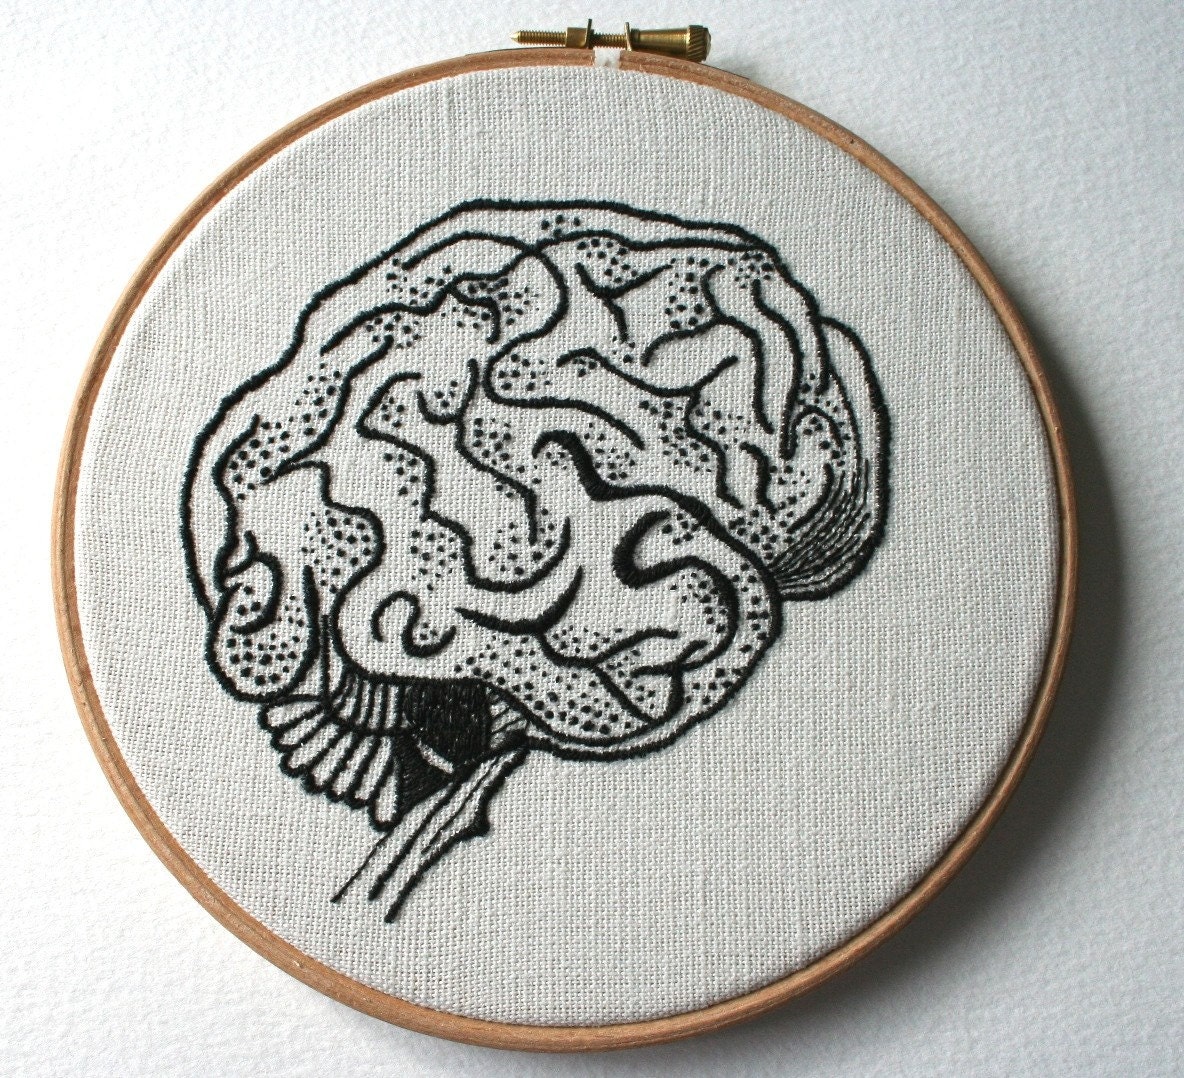 Brain Embroidery Hand Stitched Illustration Wall Plaque